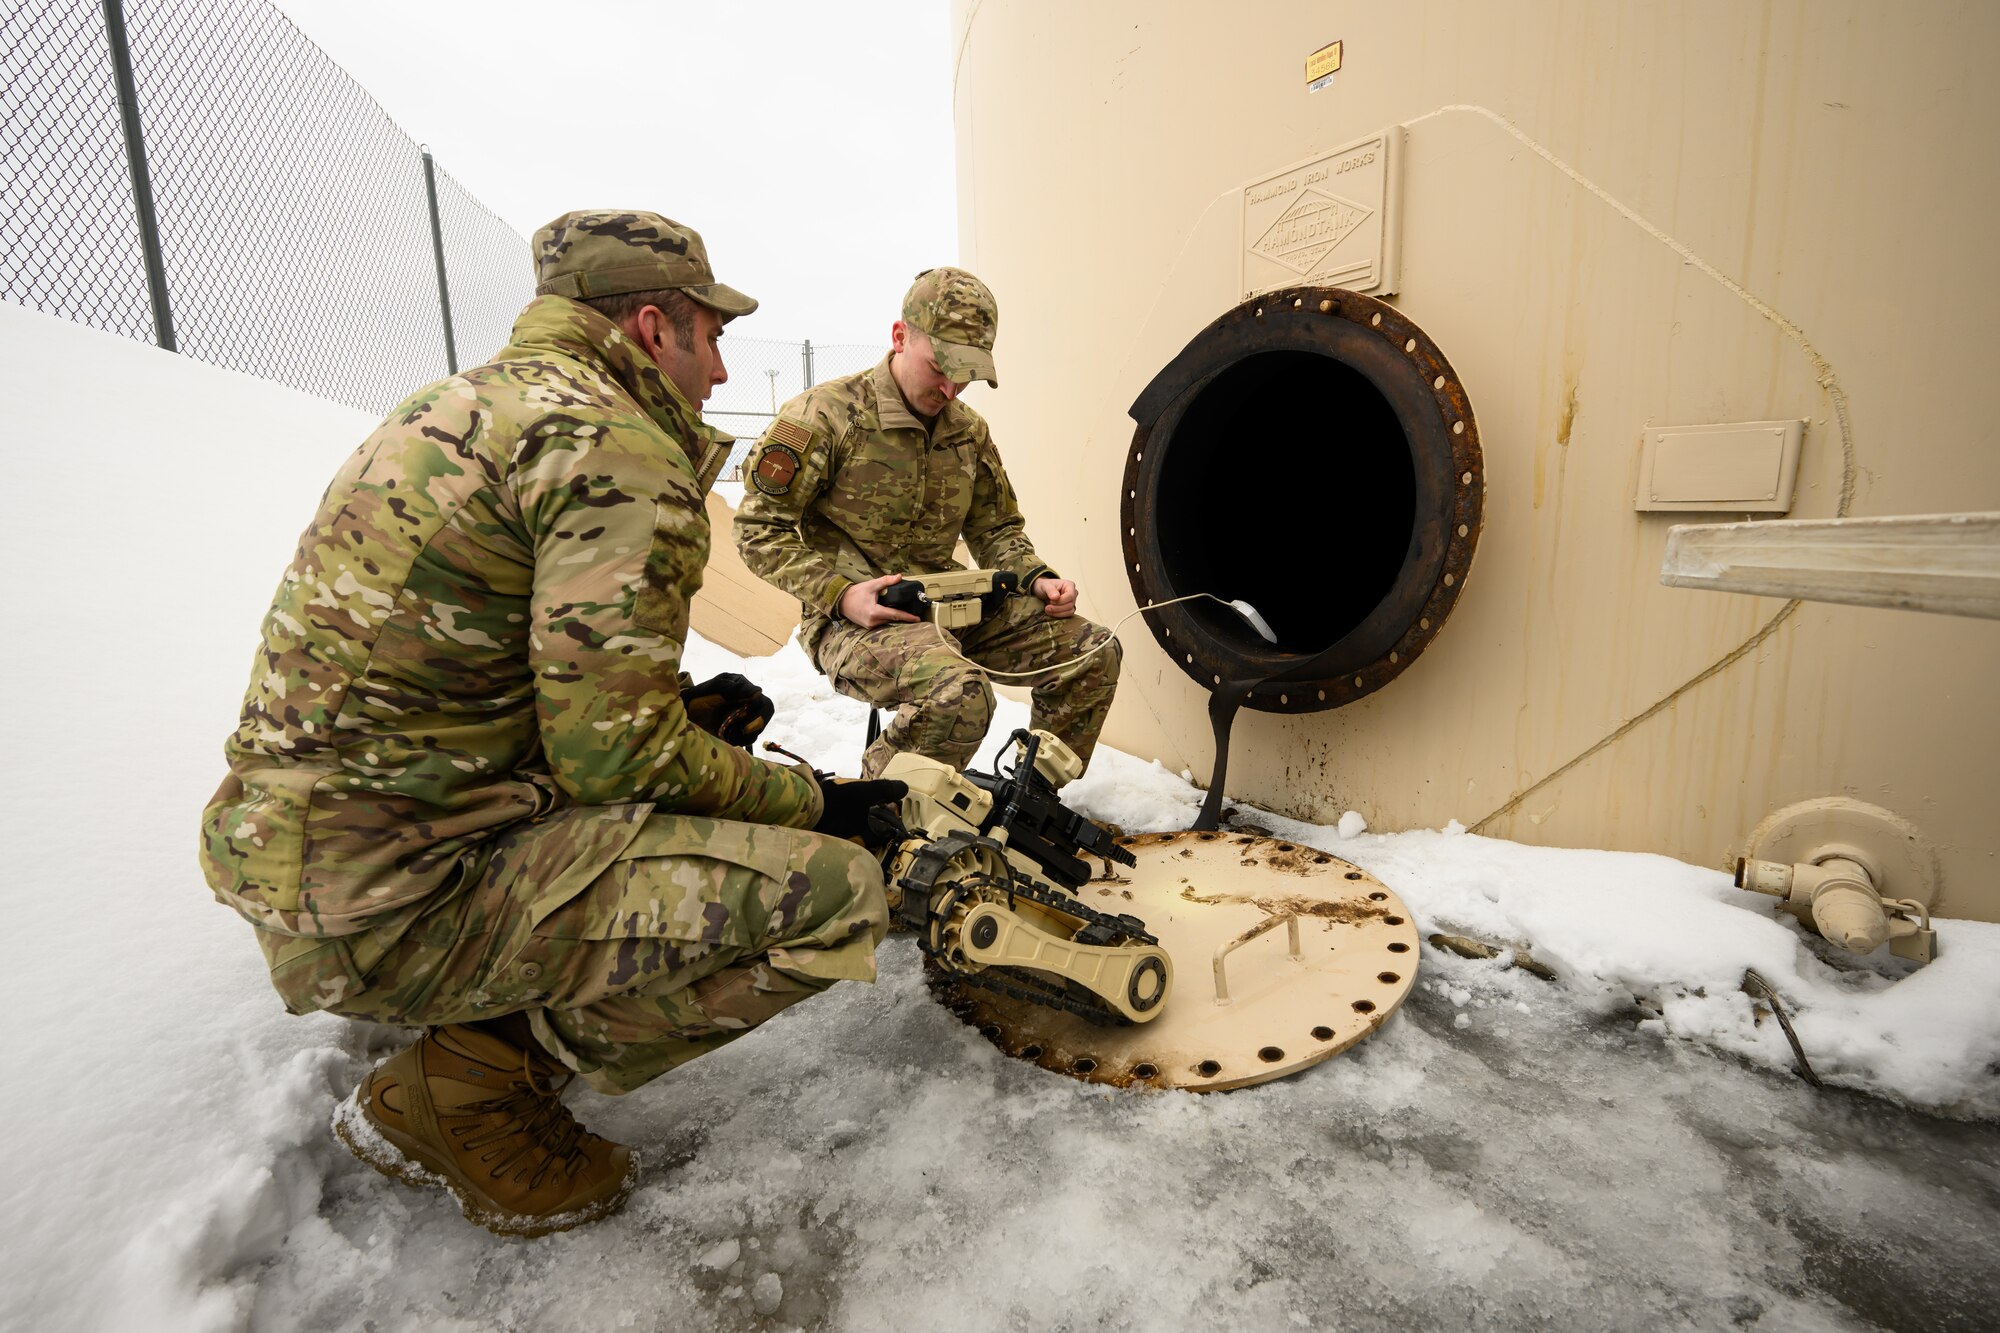 Two airmen prepare to drive a robot into a fuel tank